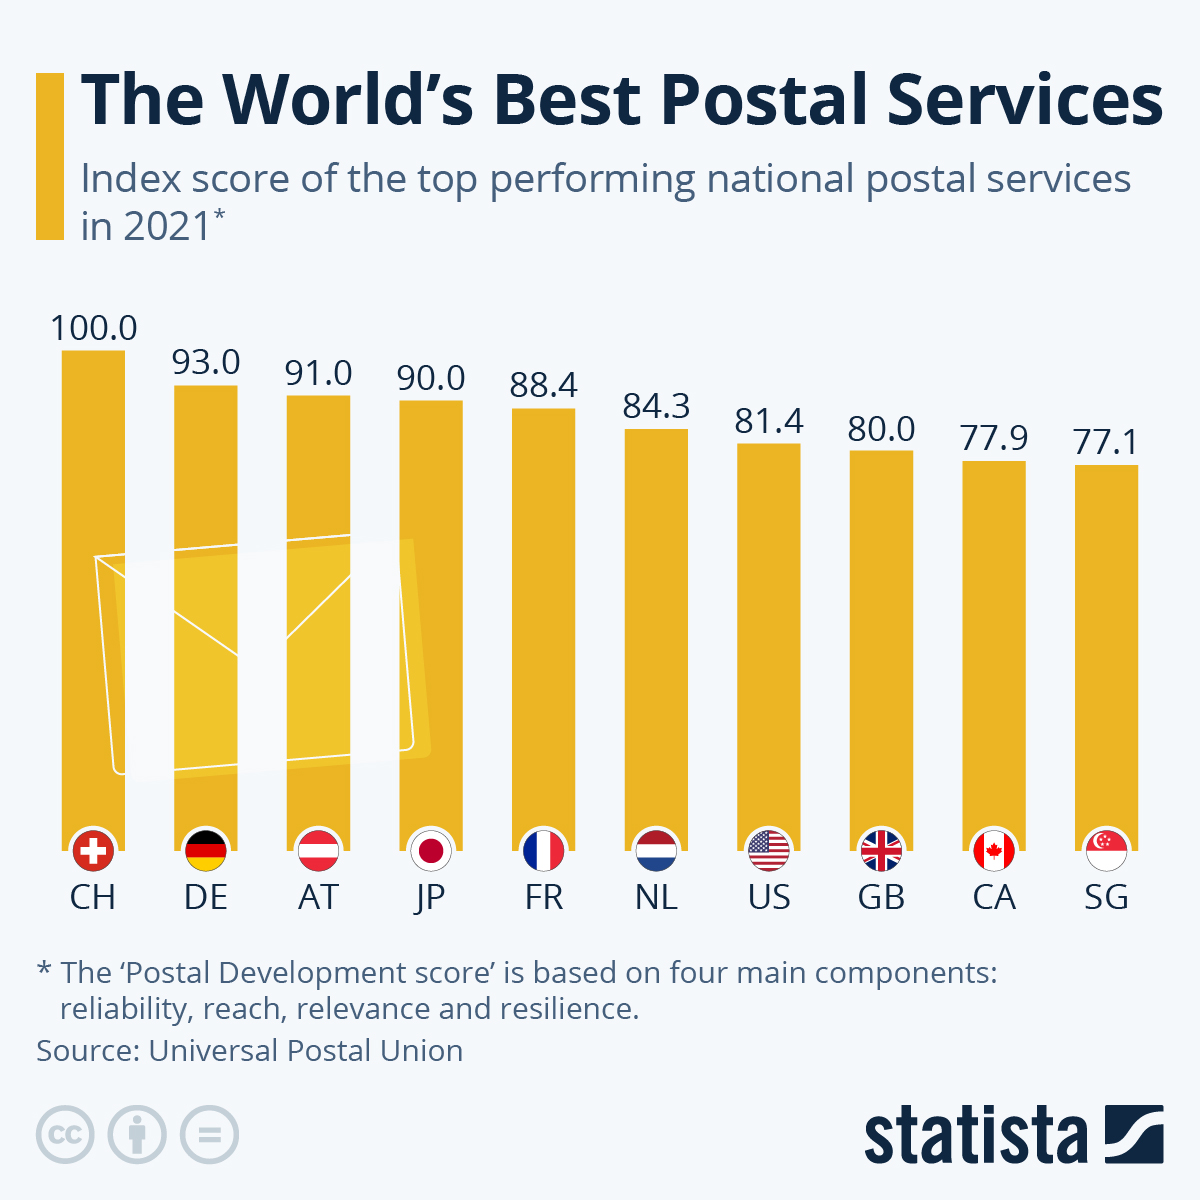 The World's Best Postal Services
